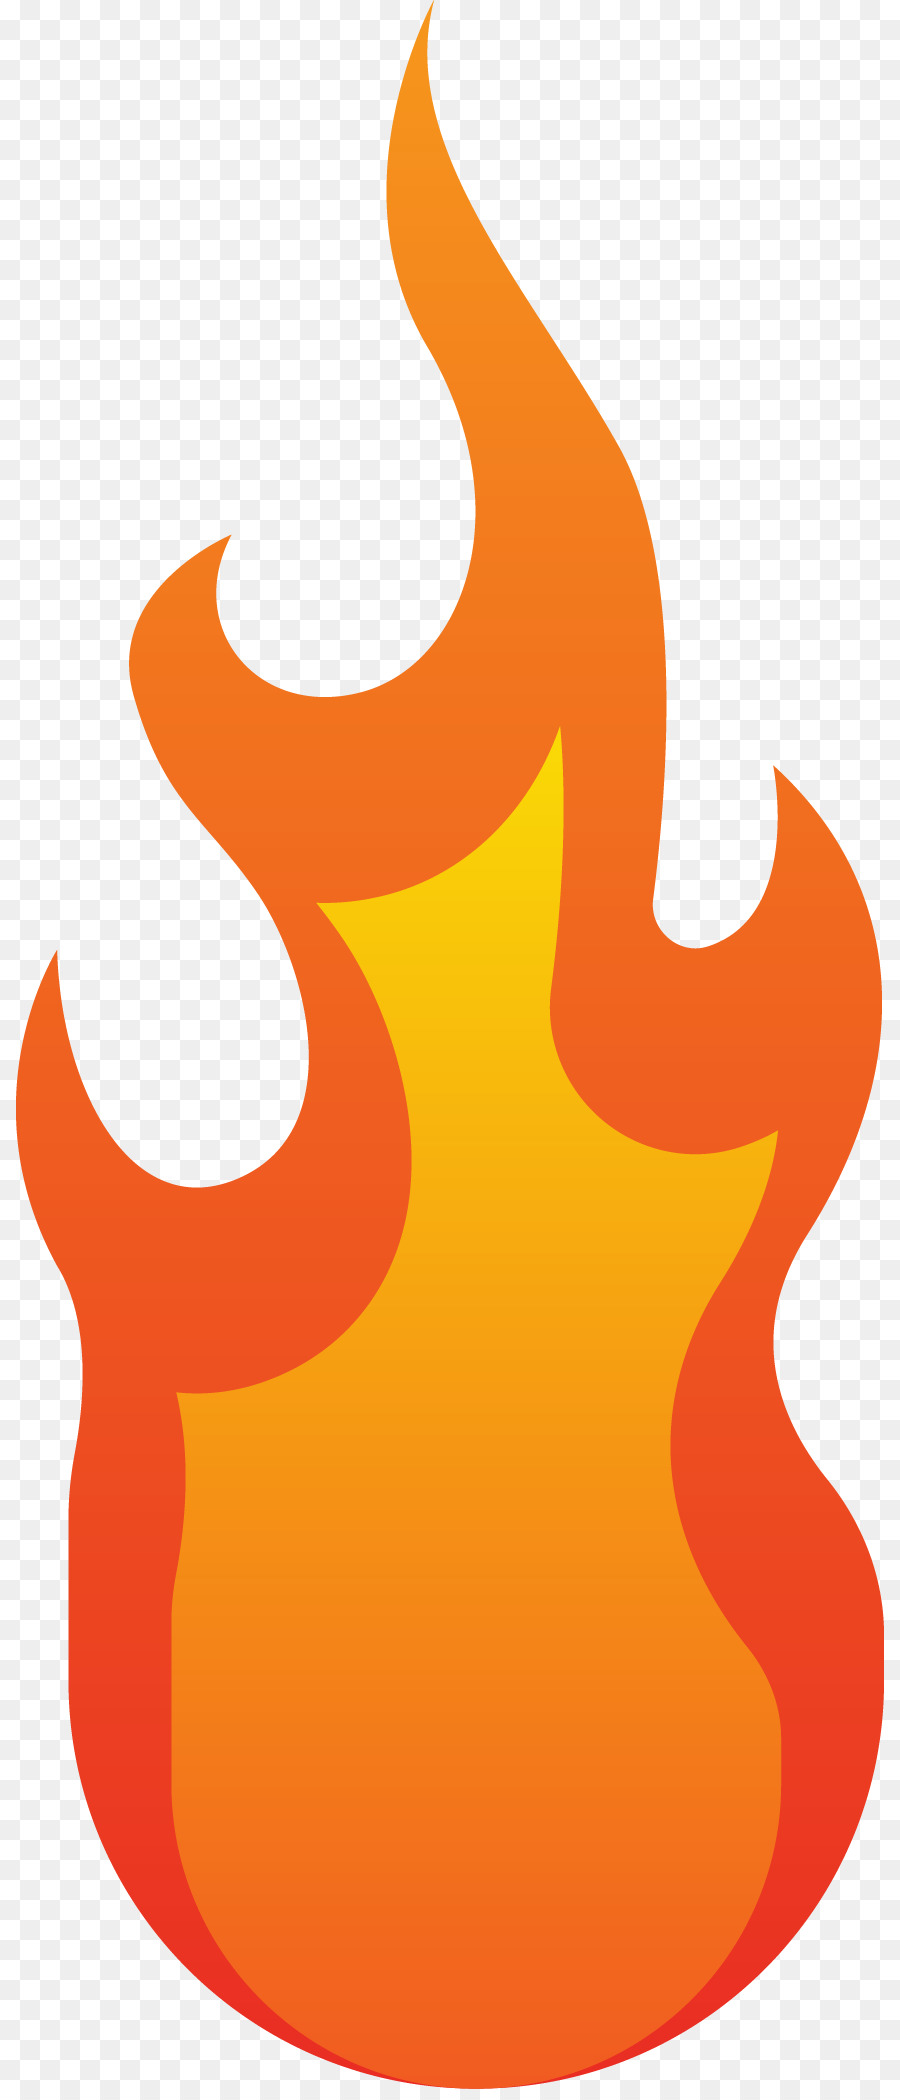 Fire Flame Combustion - Cartoon fire png download - 868*2089 - Free Transparent Fire png Download.